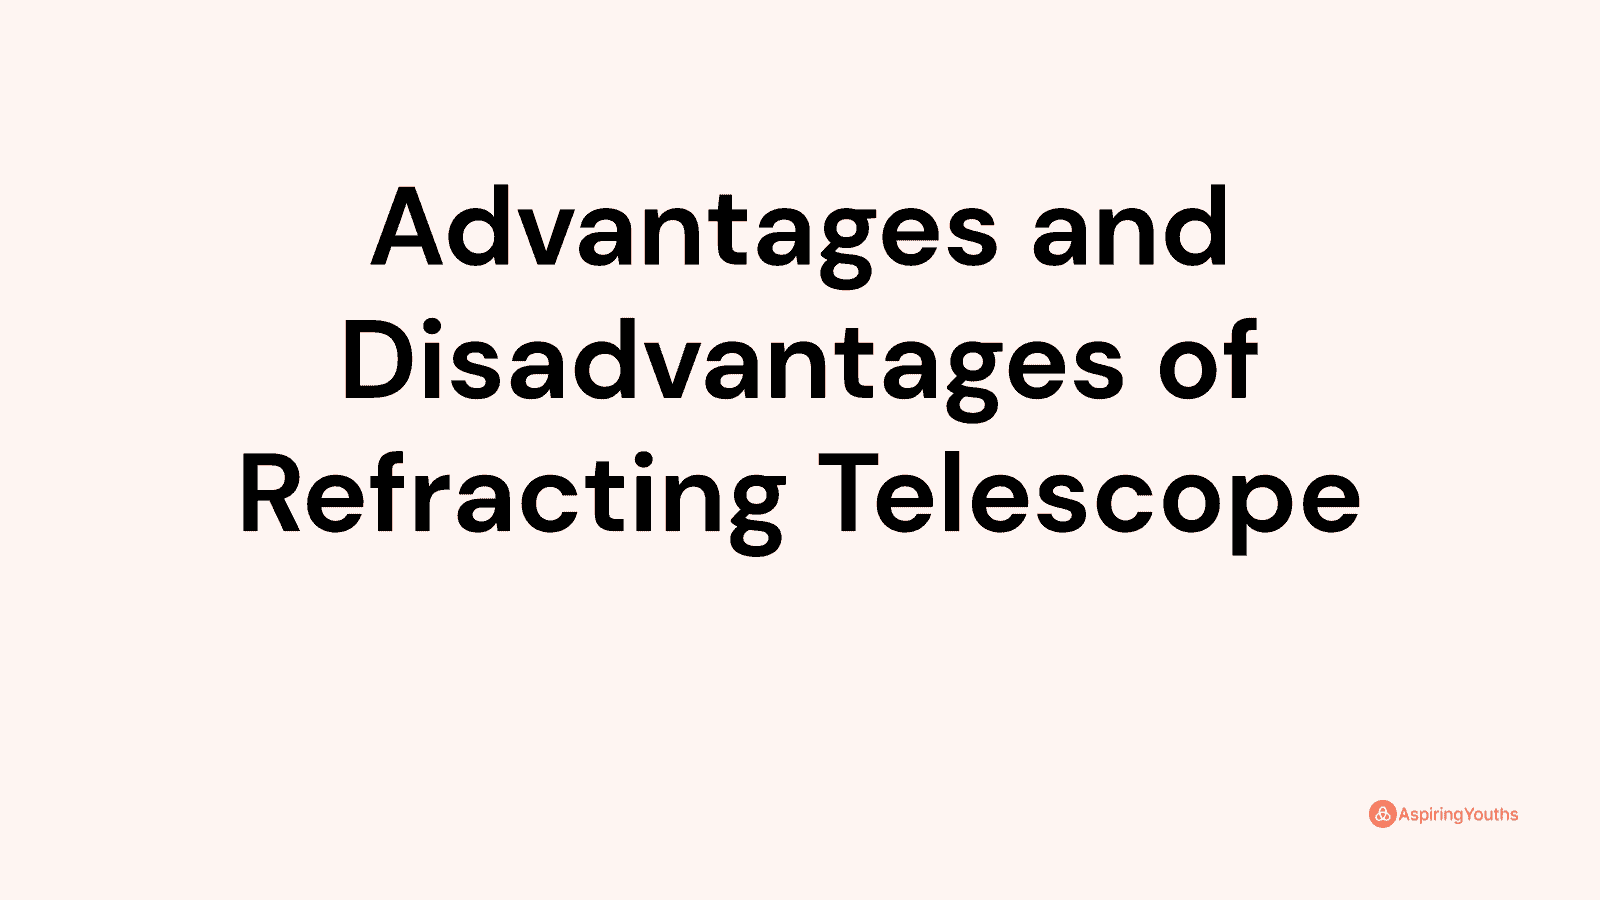 Advantages and disadvantages of Refracting Telescope